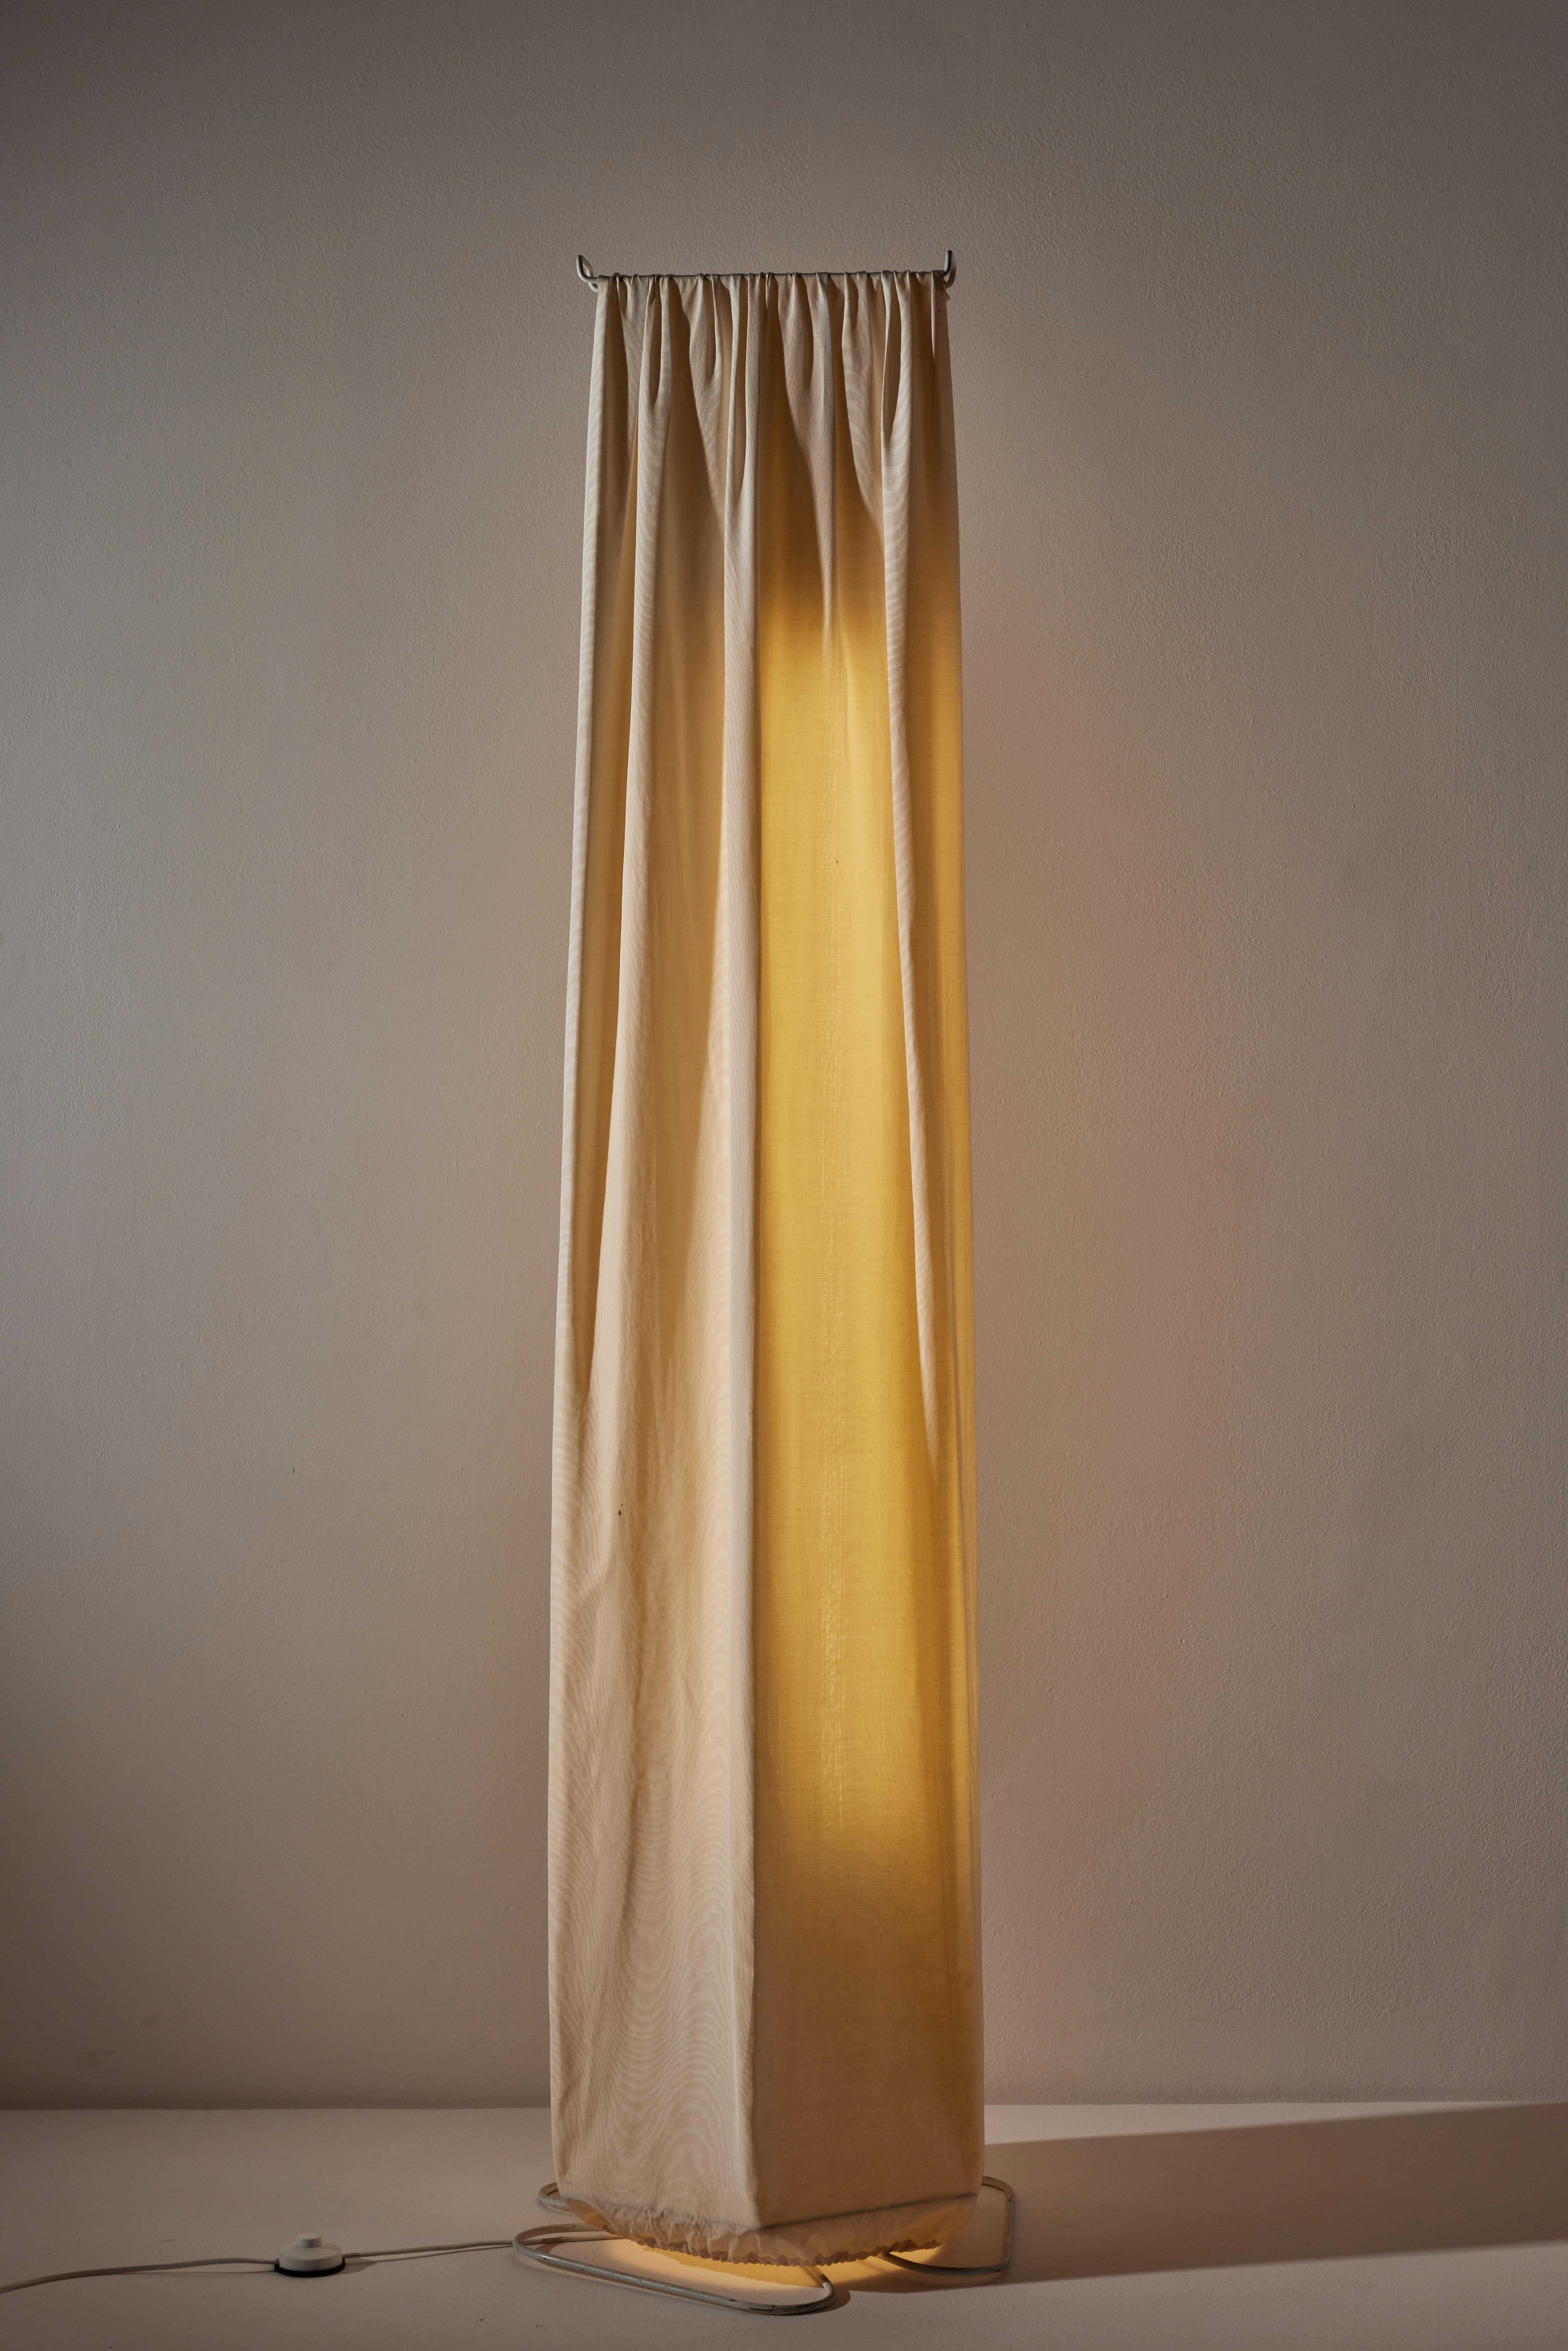 Katia floor lamp by Tobia Scarpa for Flos. Designed and manufactured in Italy, circa 1970's. Lacquered metal structure with fabric diffuser. Original European cord. We recommend two fluorescent 120v bulbs. Bulbs provided as a one time courtesy.